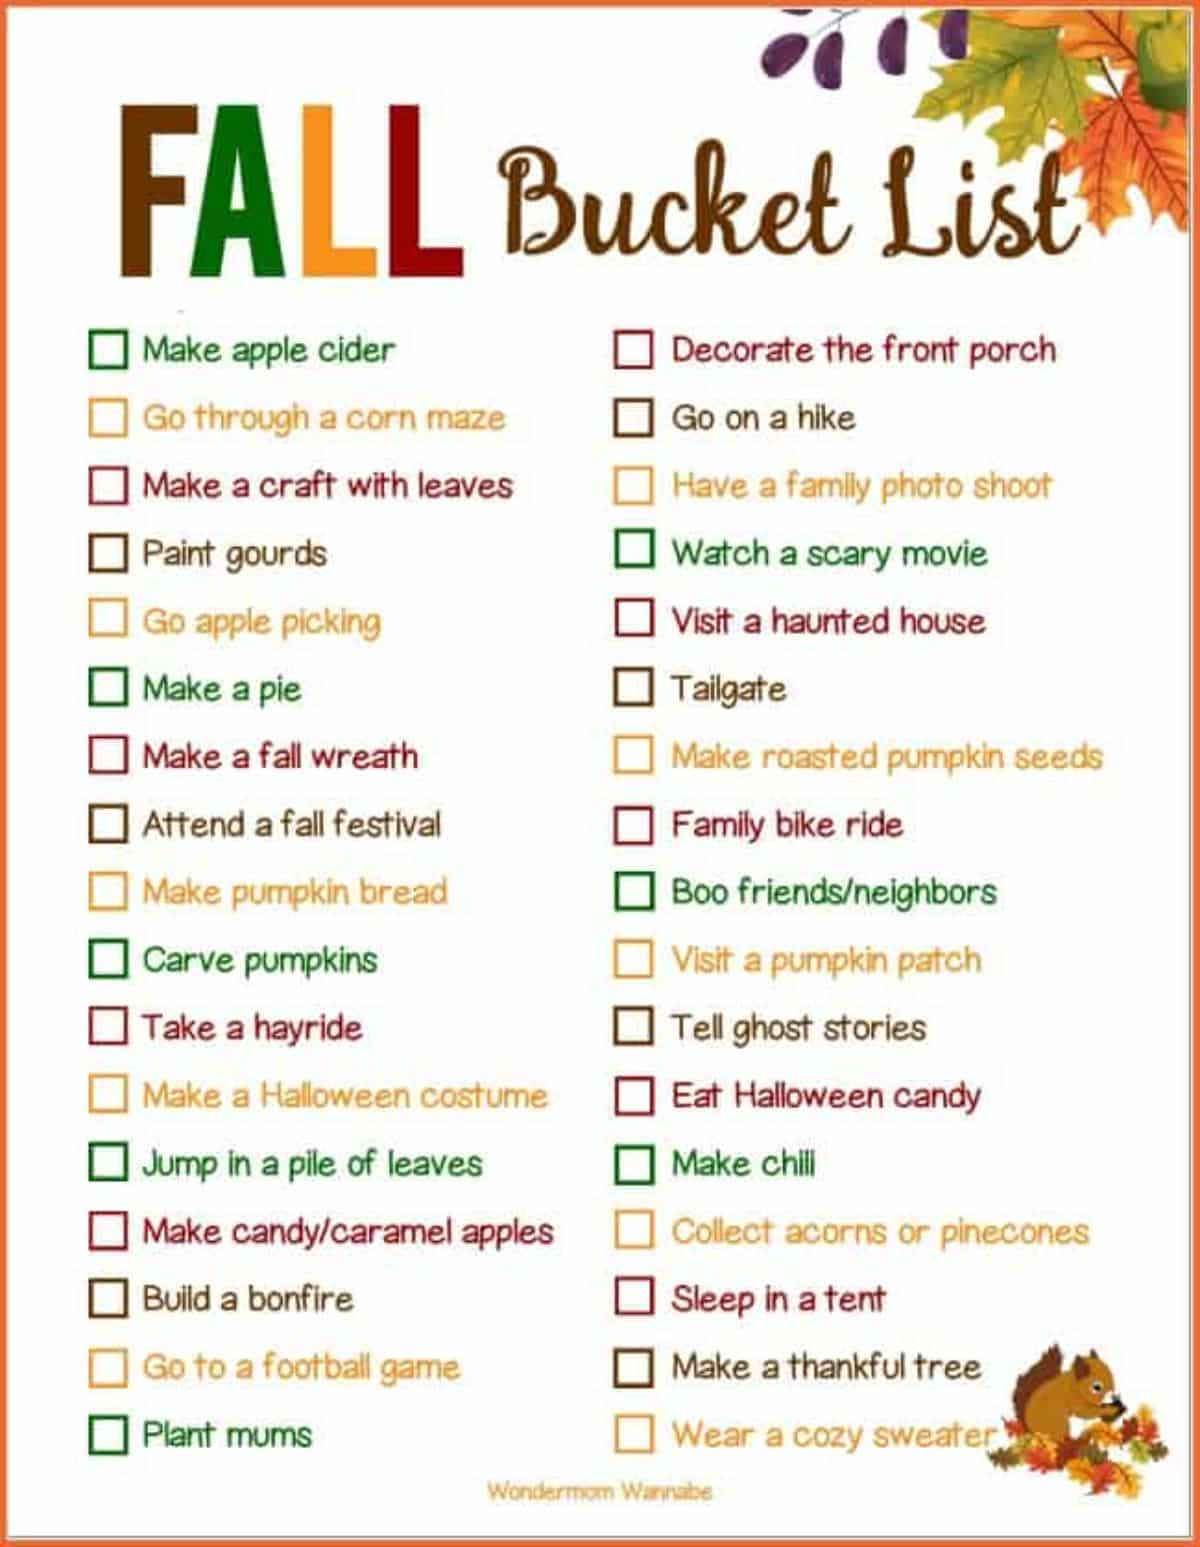 Fall bucket list with a printable guide for a fun and adventurous fall scavenger hunt.